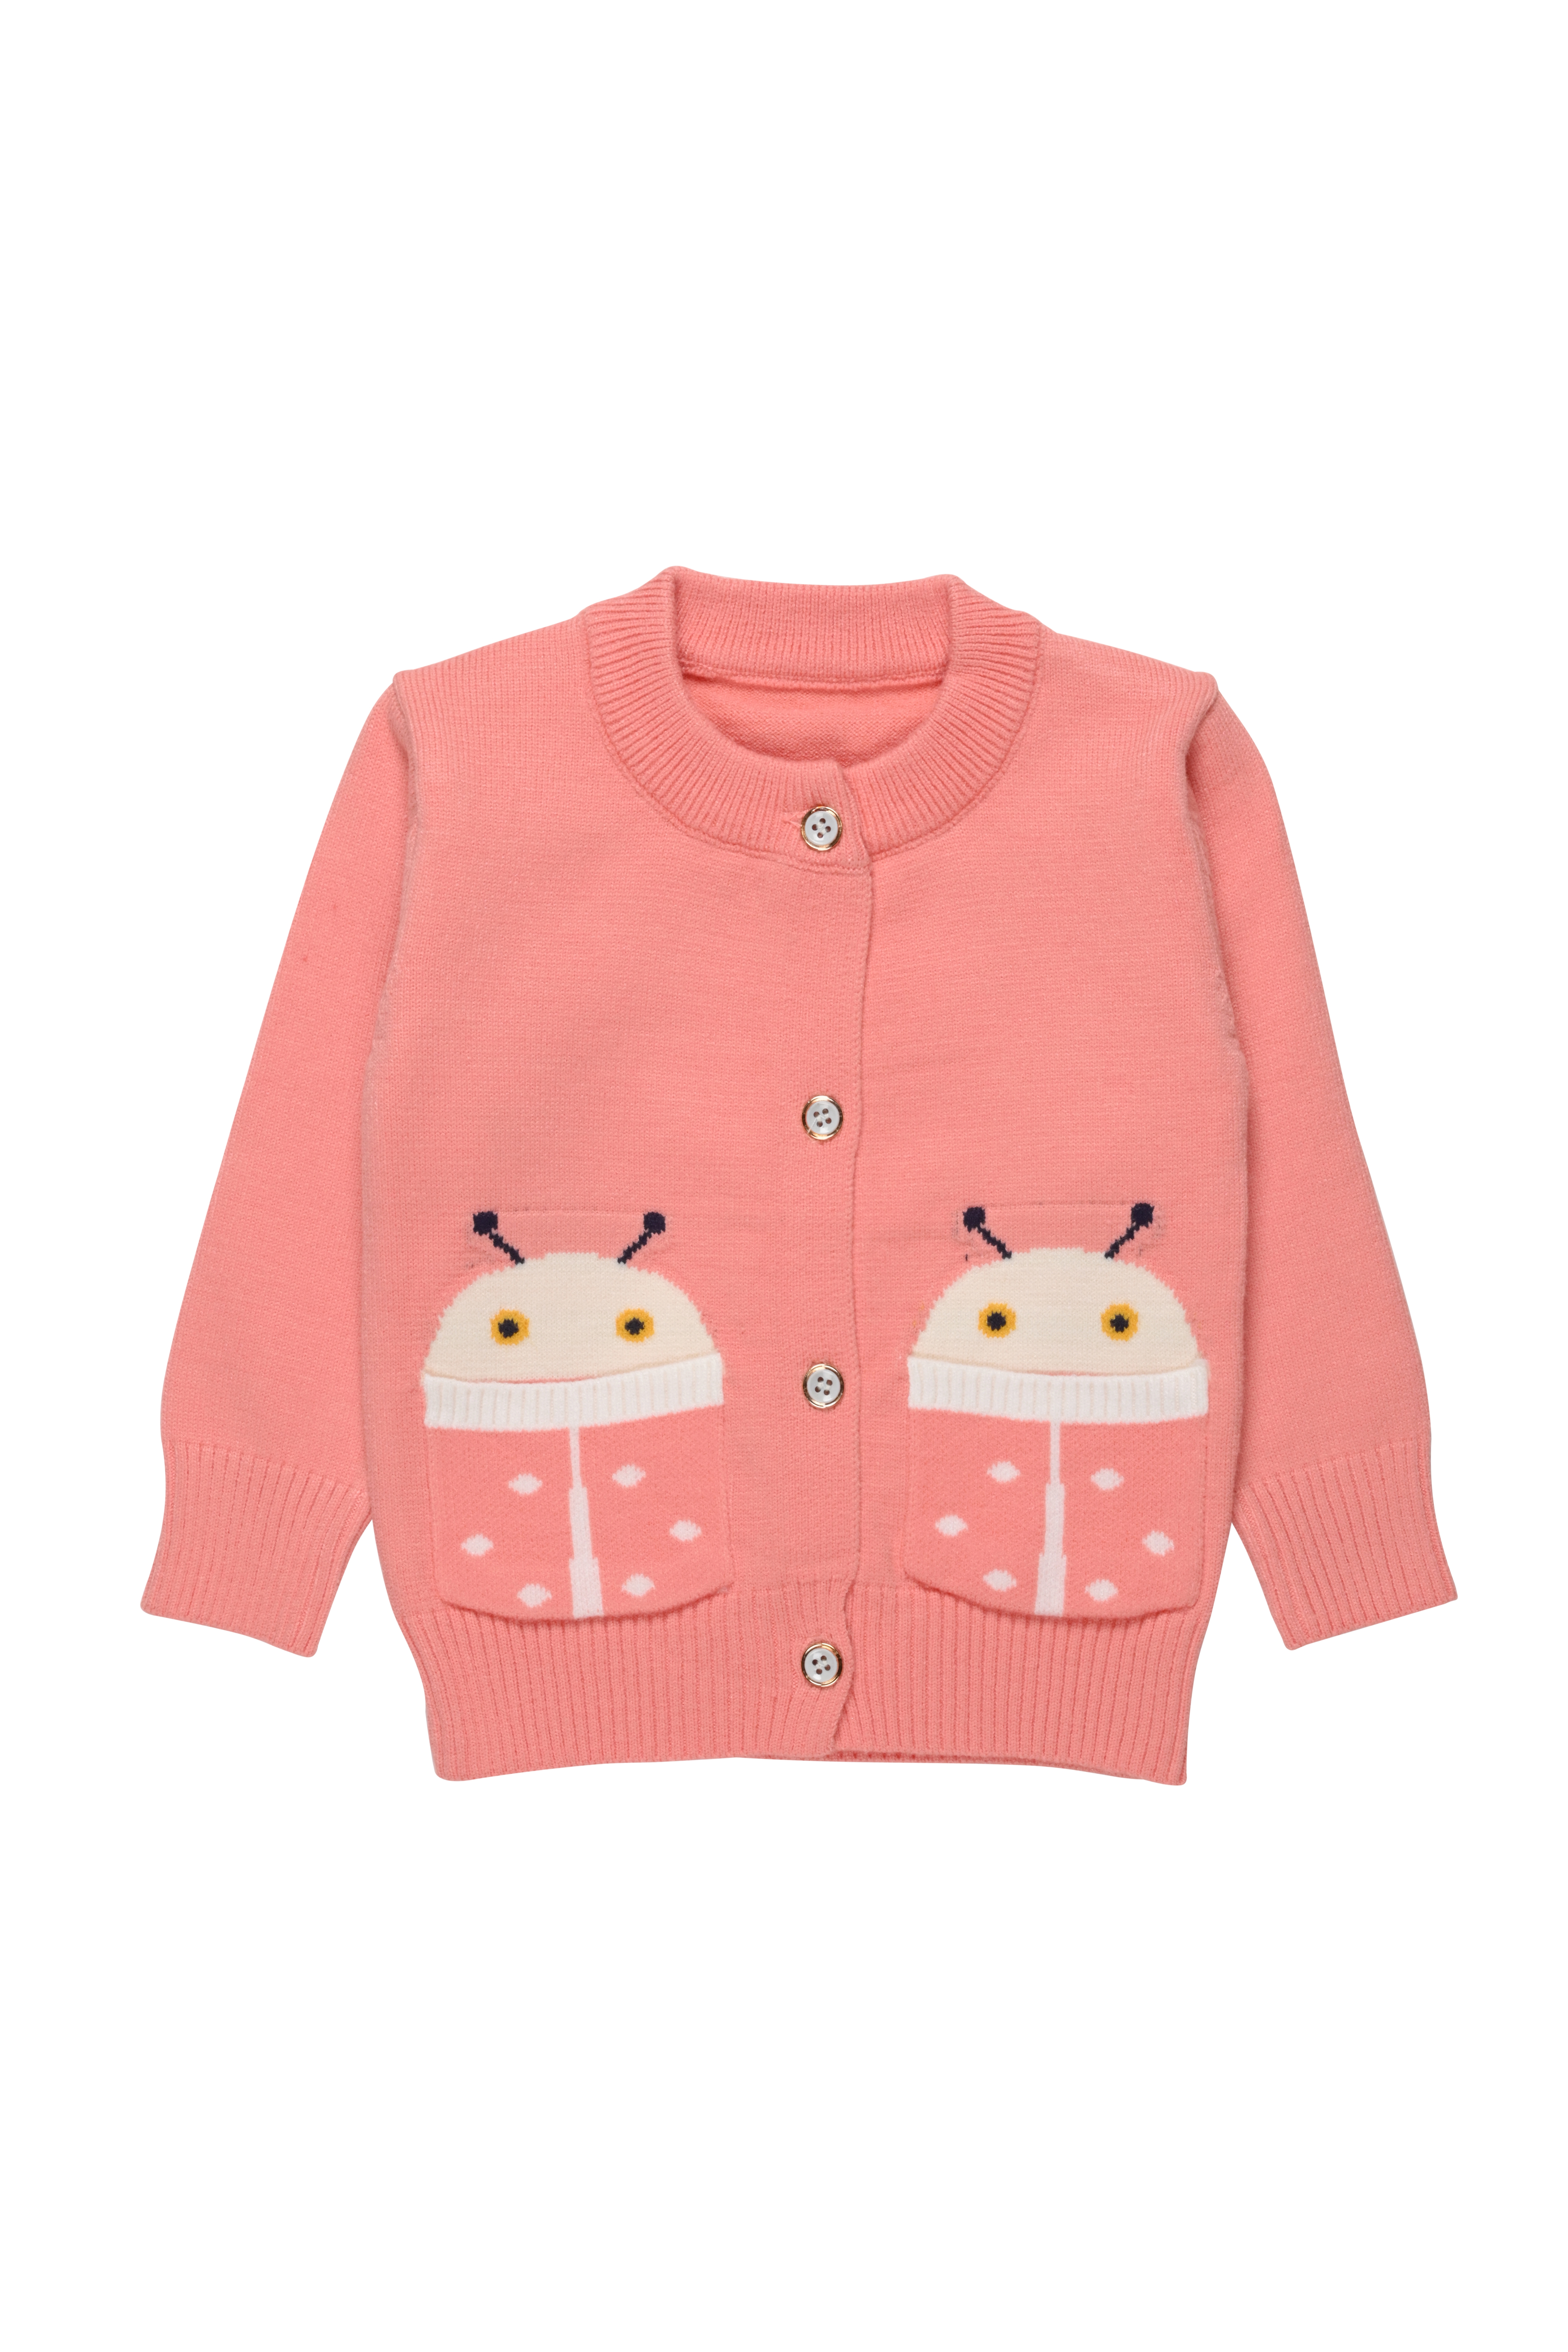 Mothercare | Girls Full Sleeves Sweater -Pink